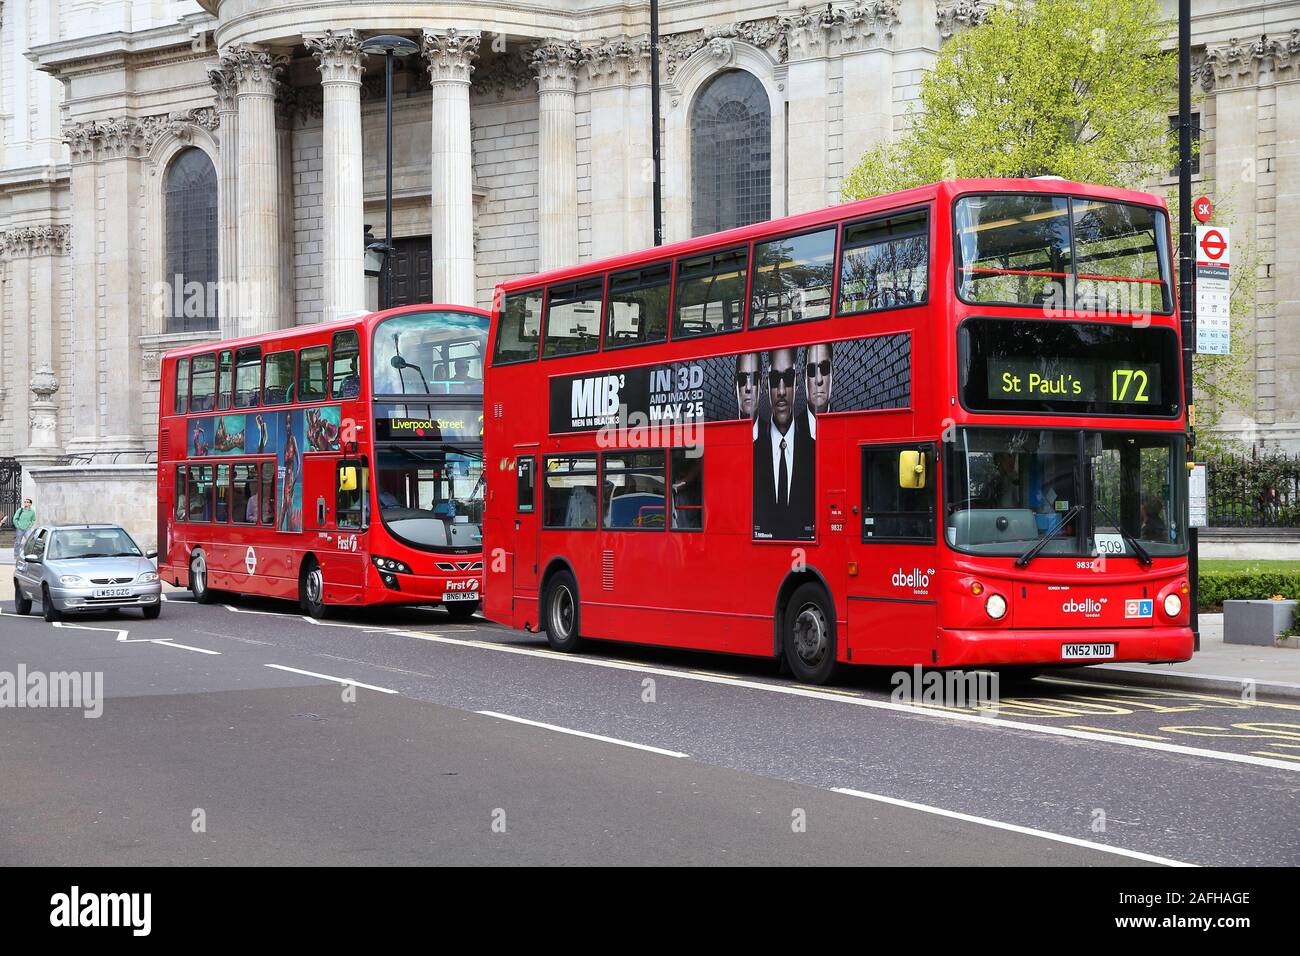 LONDON, UK - MAY 13, 2012: People ride London Buses in London. Part of city public transportation, London Buses carry 6 million people on a week day. Stock Photo